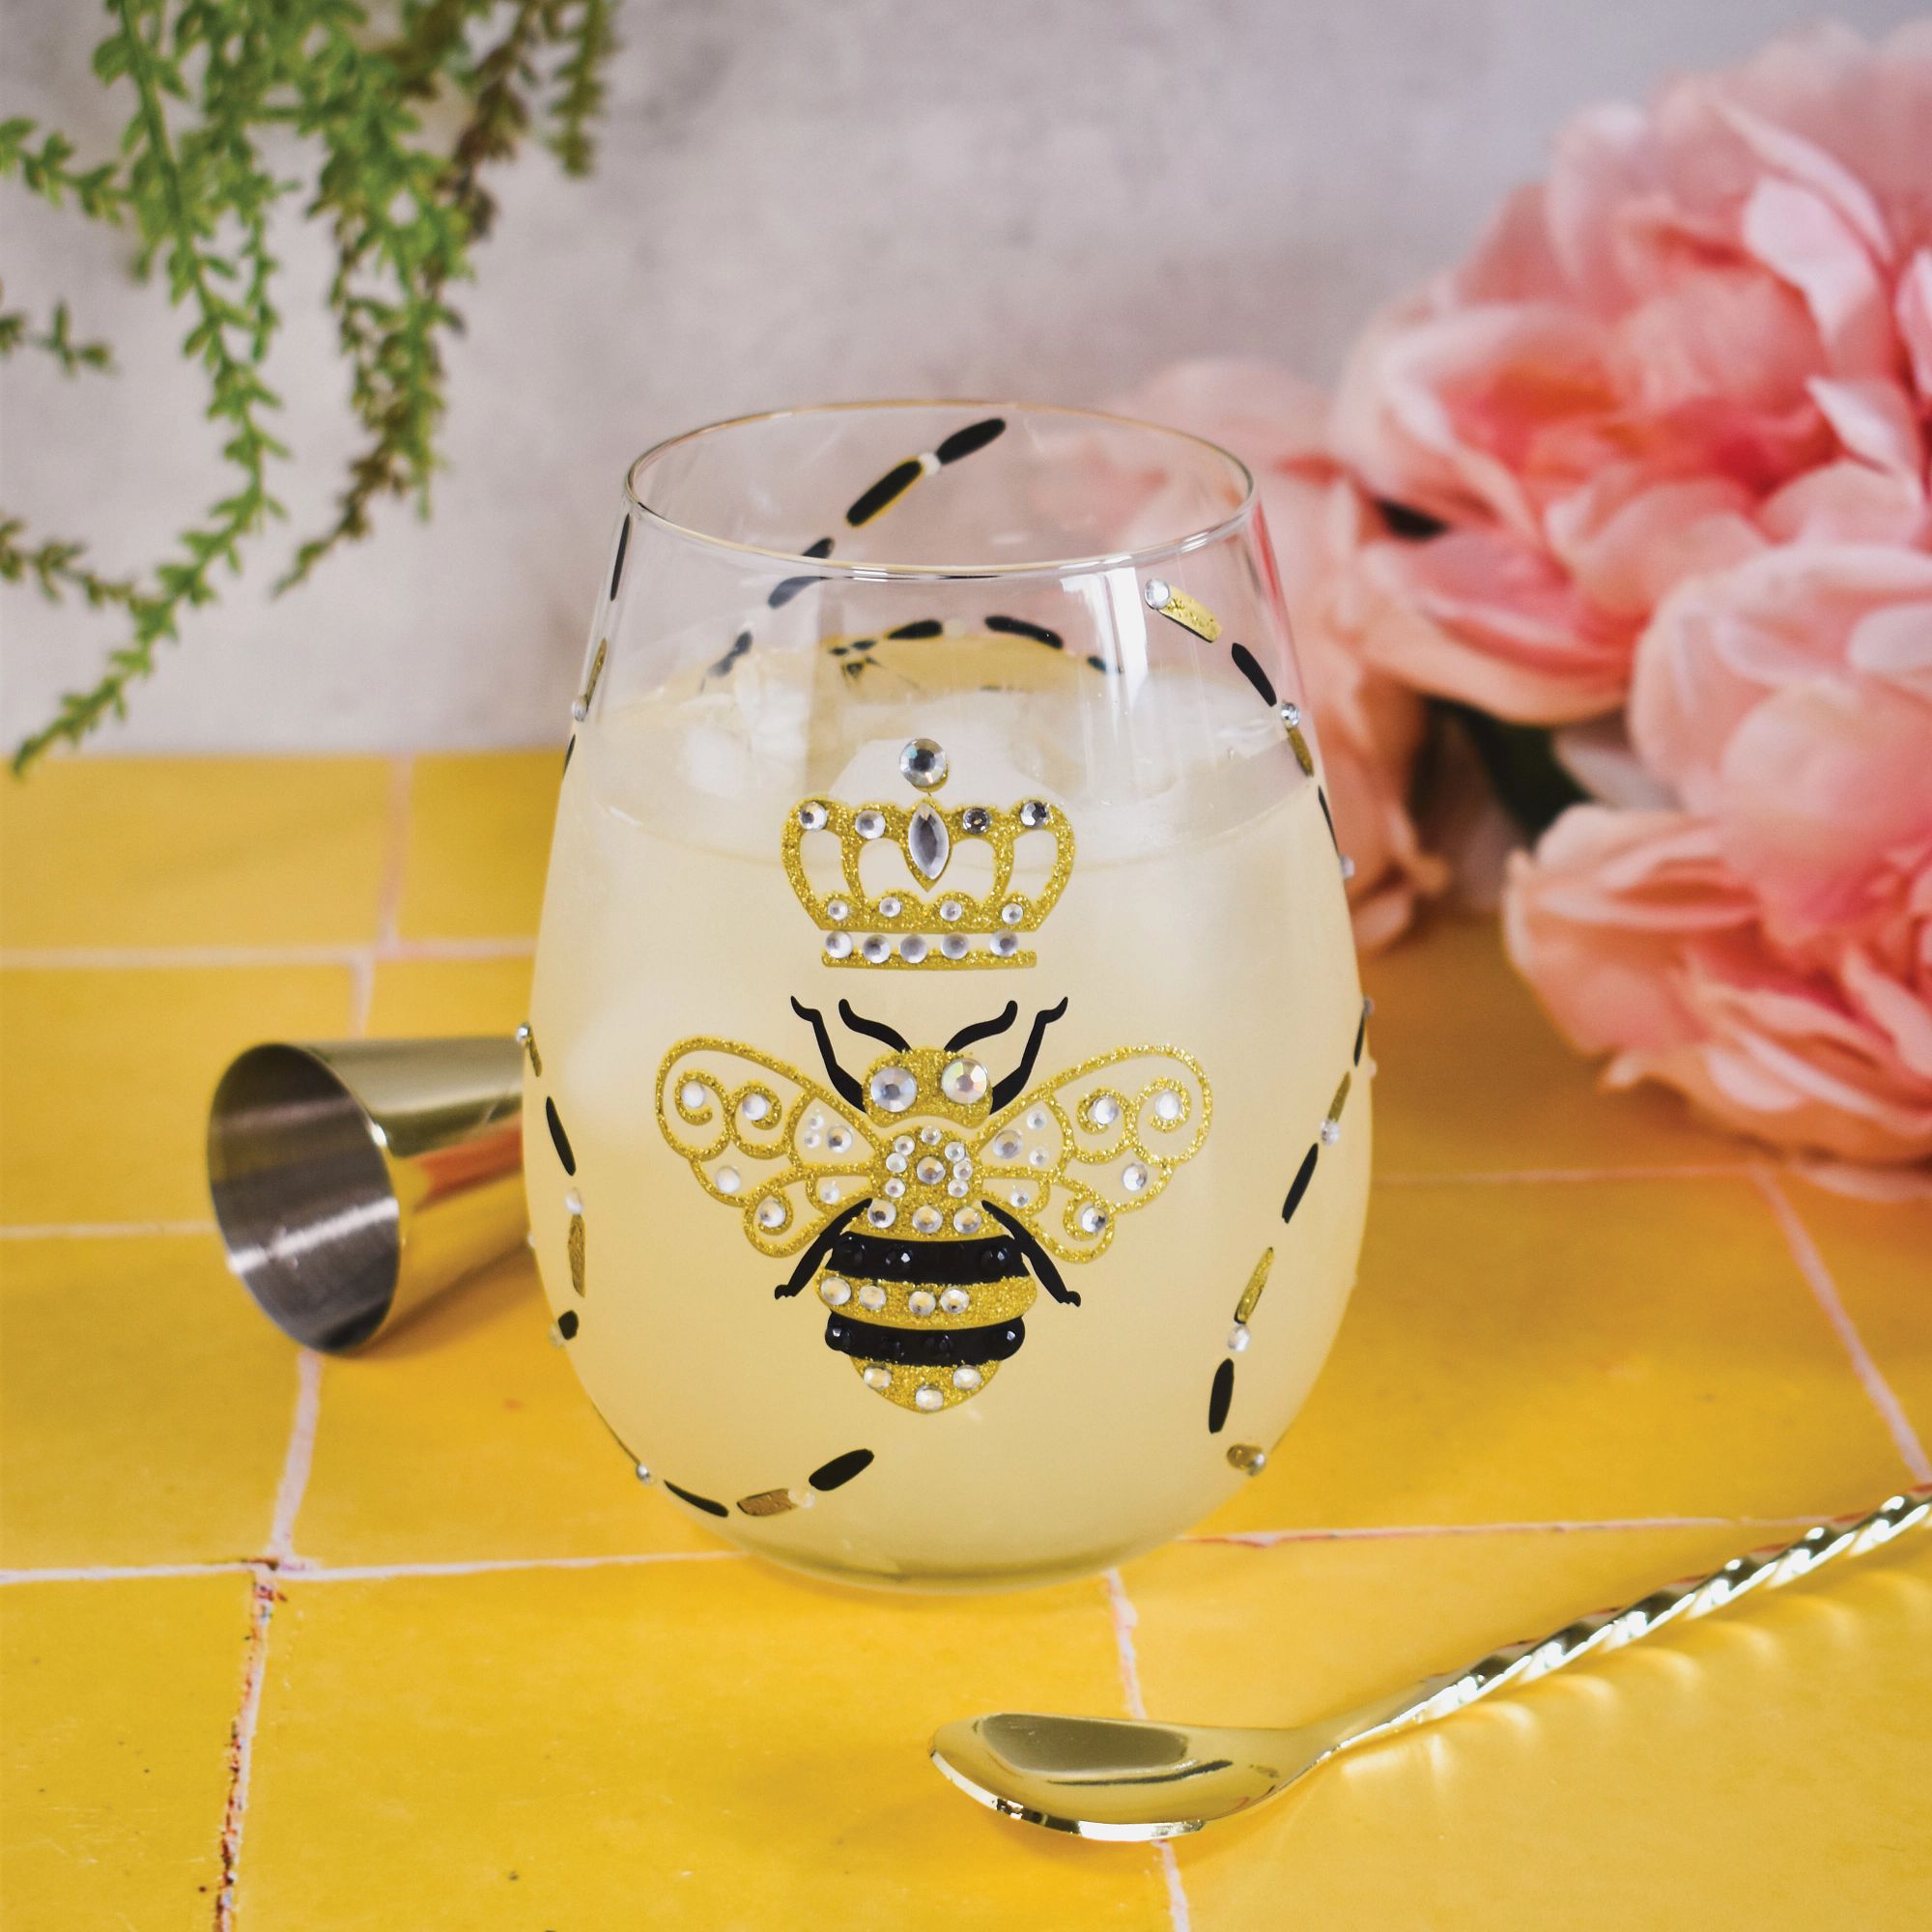 Bedazzled Bee Wine Glasses, Bee Stemless Wine Glasses